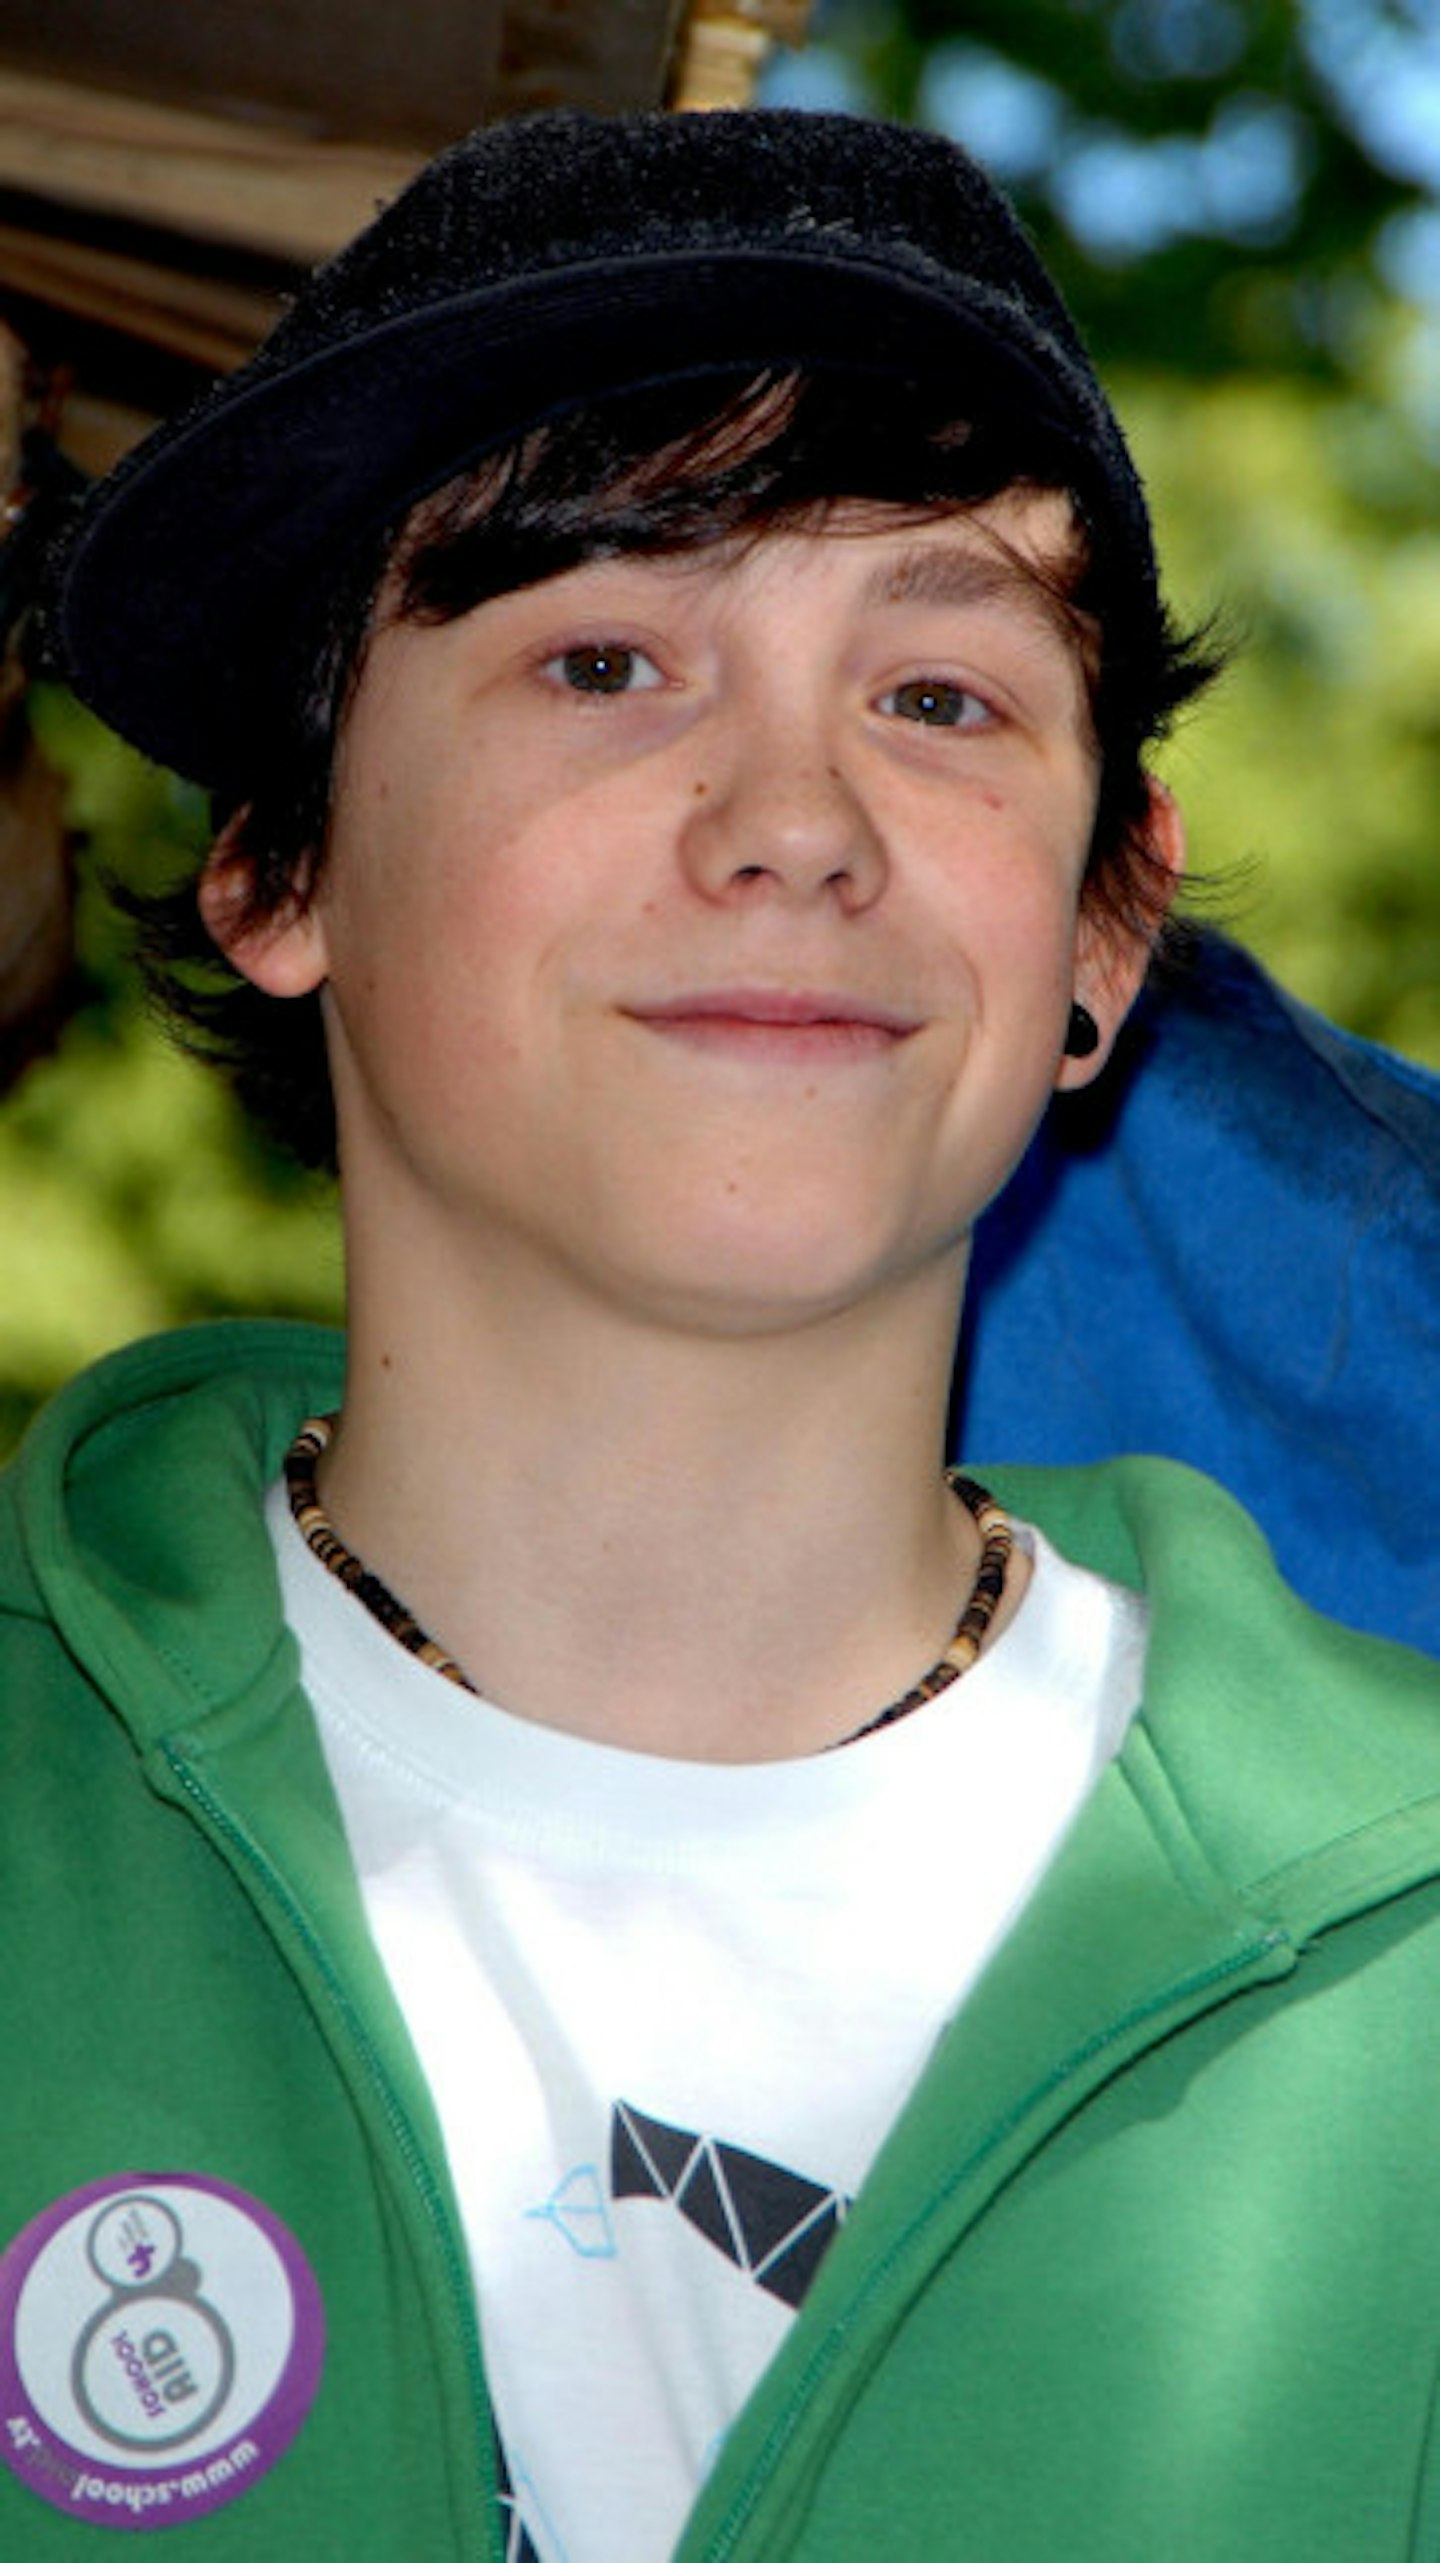 Lil Chris in 2007